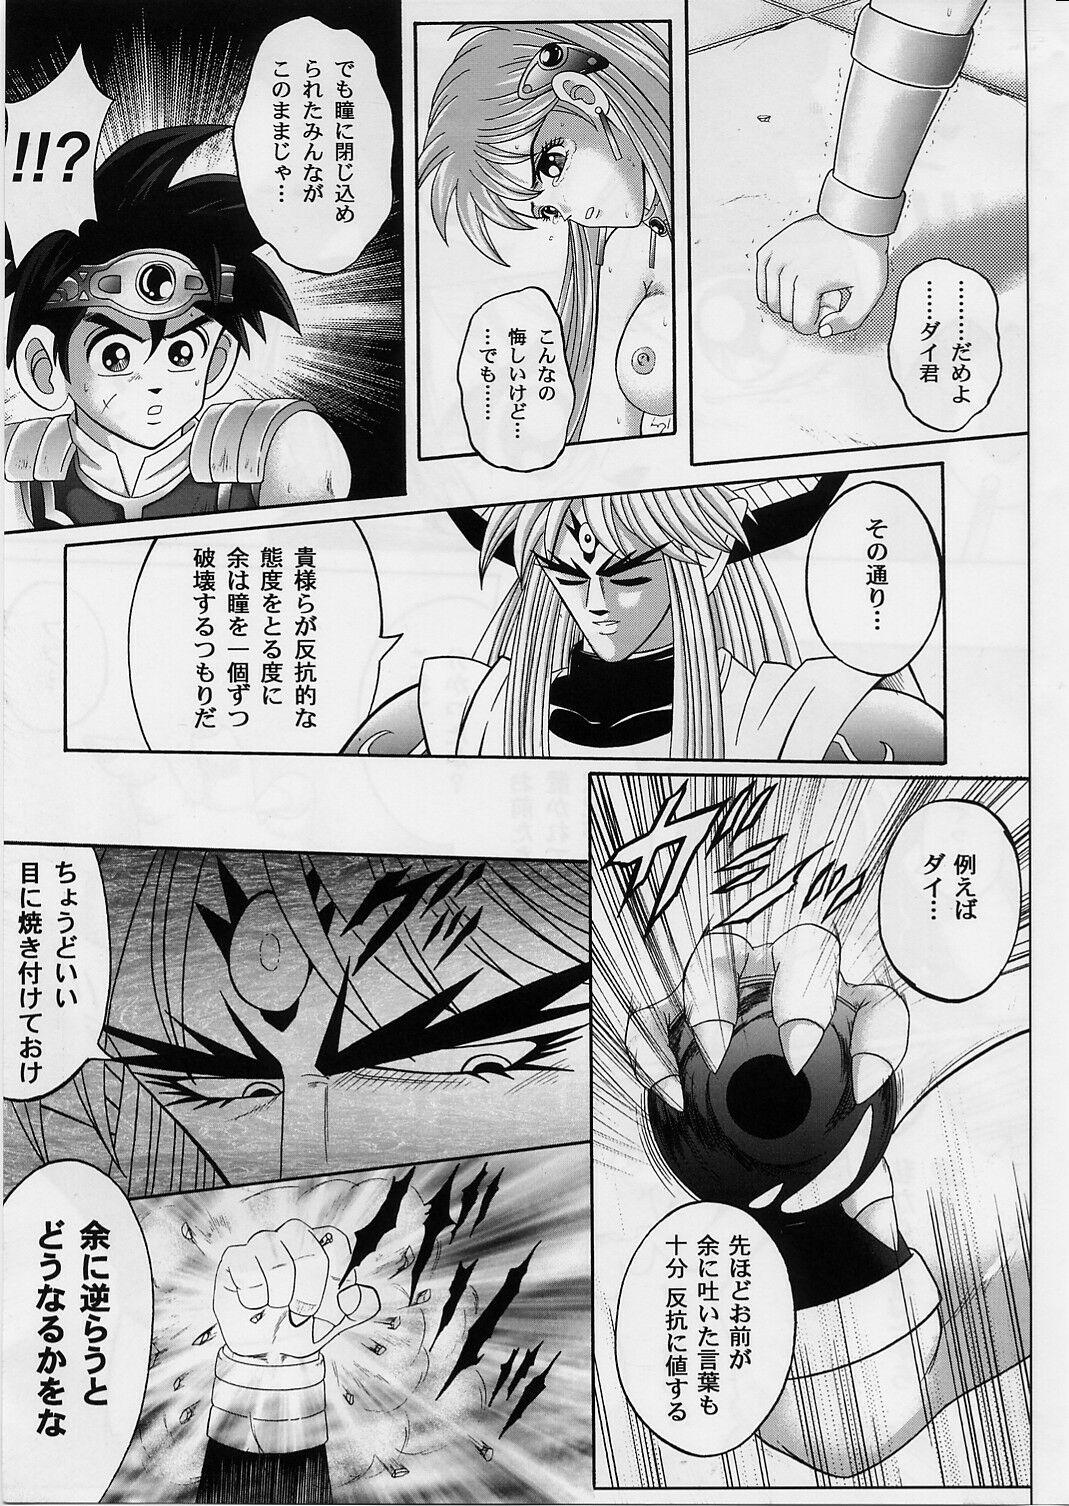 Dom DIME ALLIANCE 2 - Dragon quest dai no daibouken Whooty - Page 8